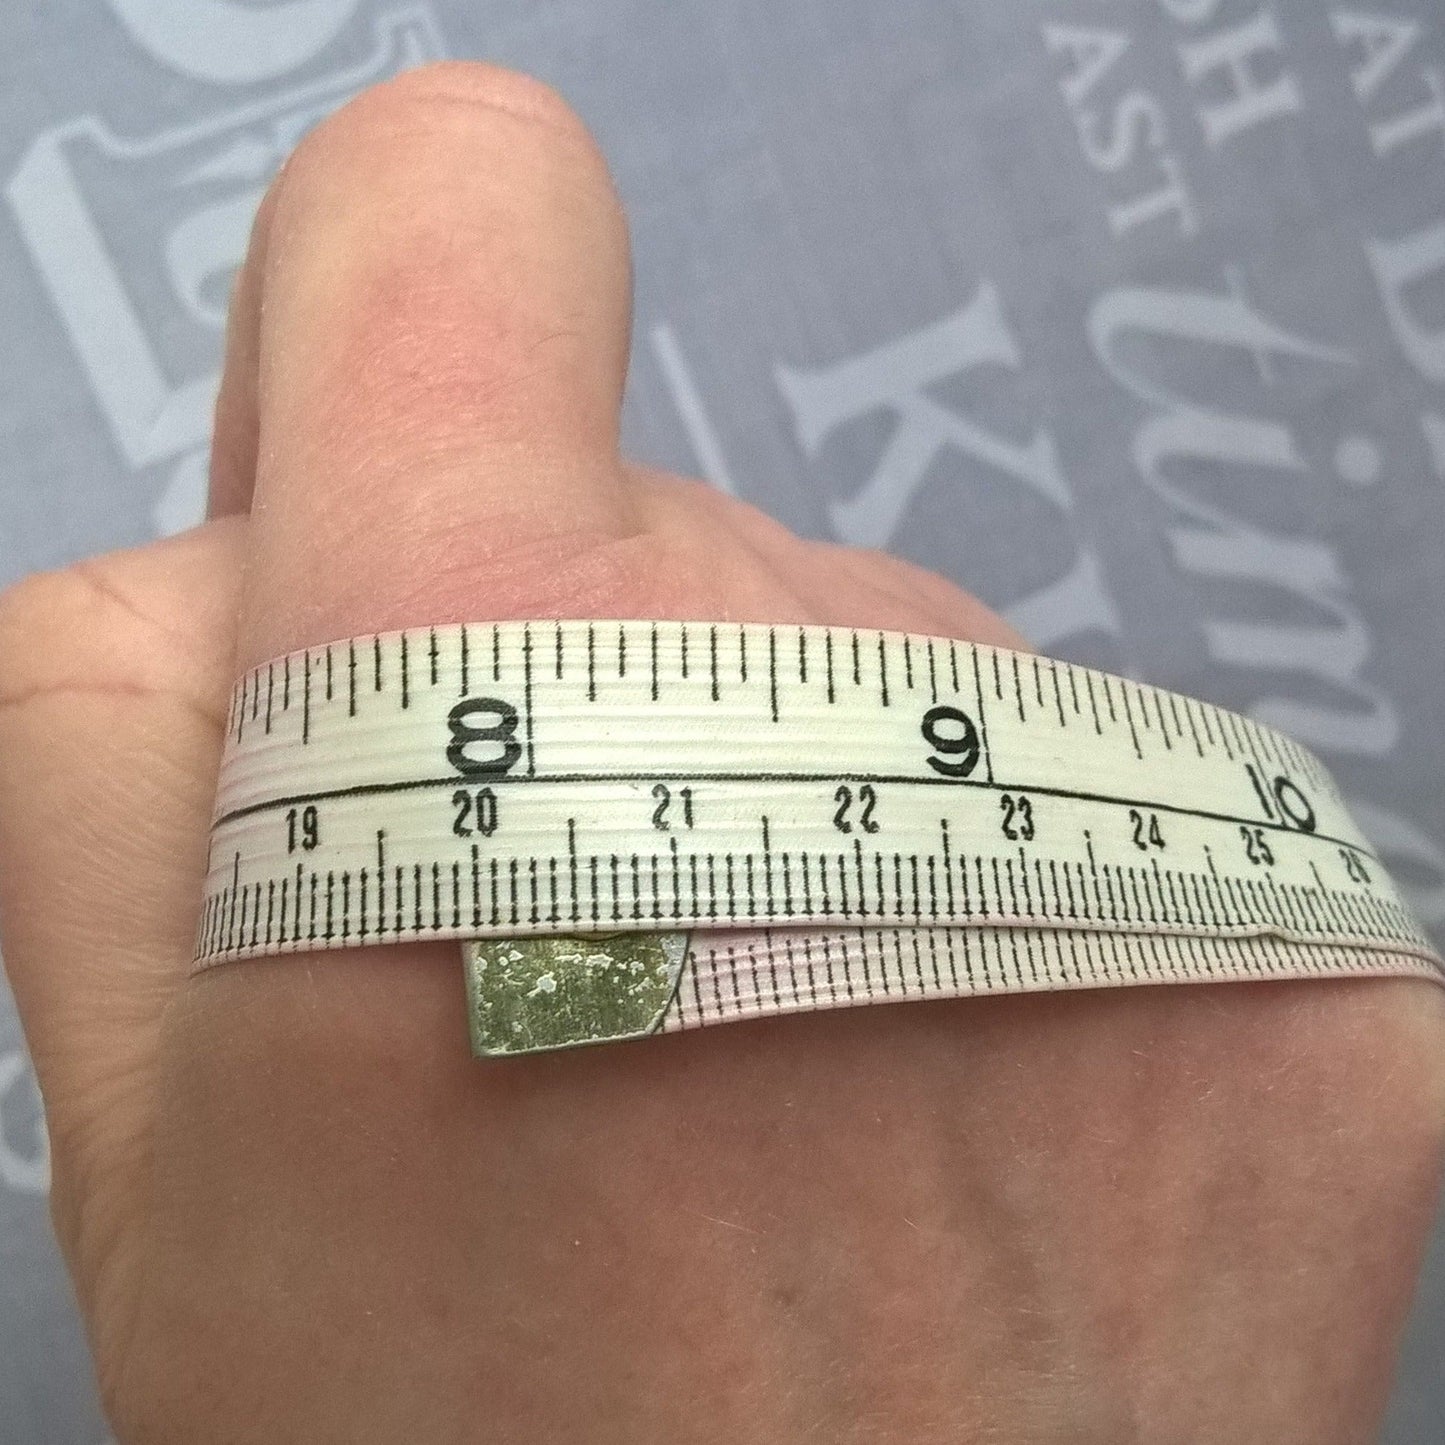 Measure around knuckles for size